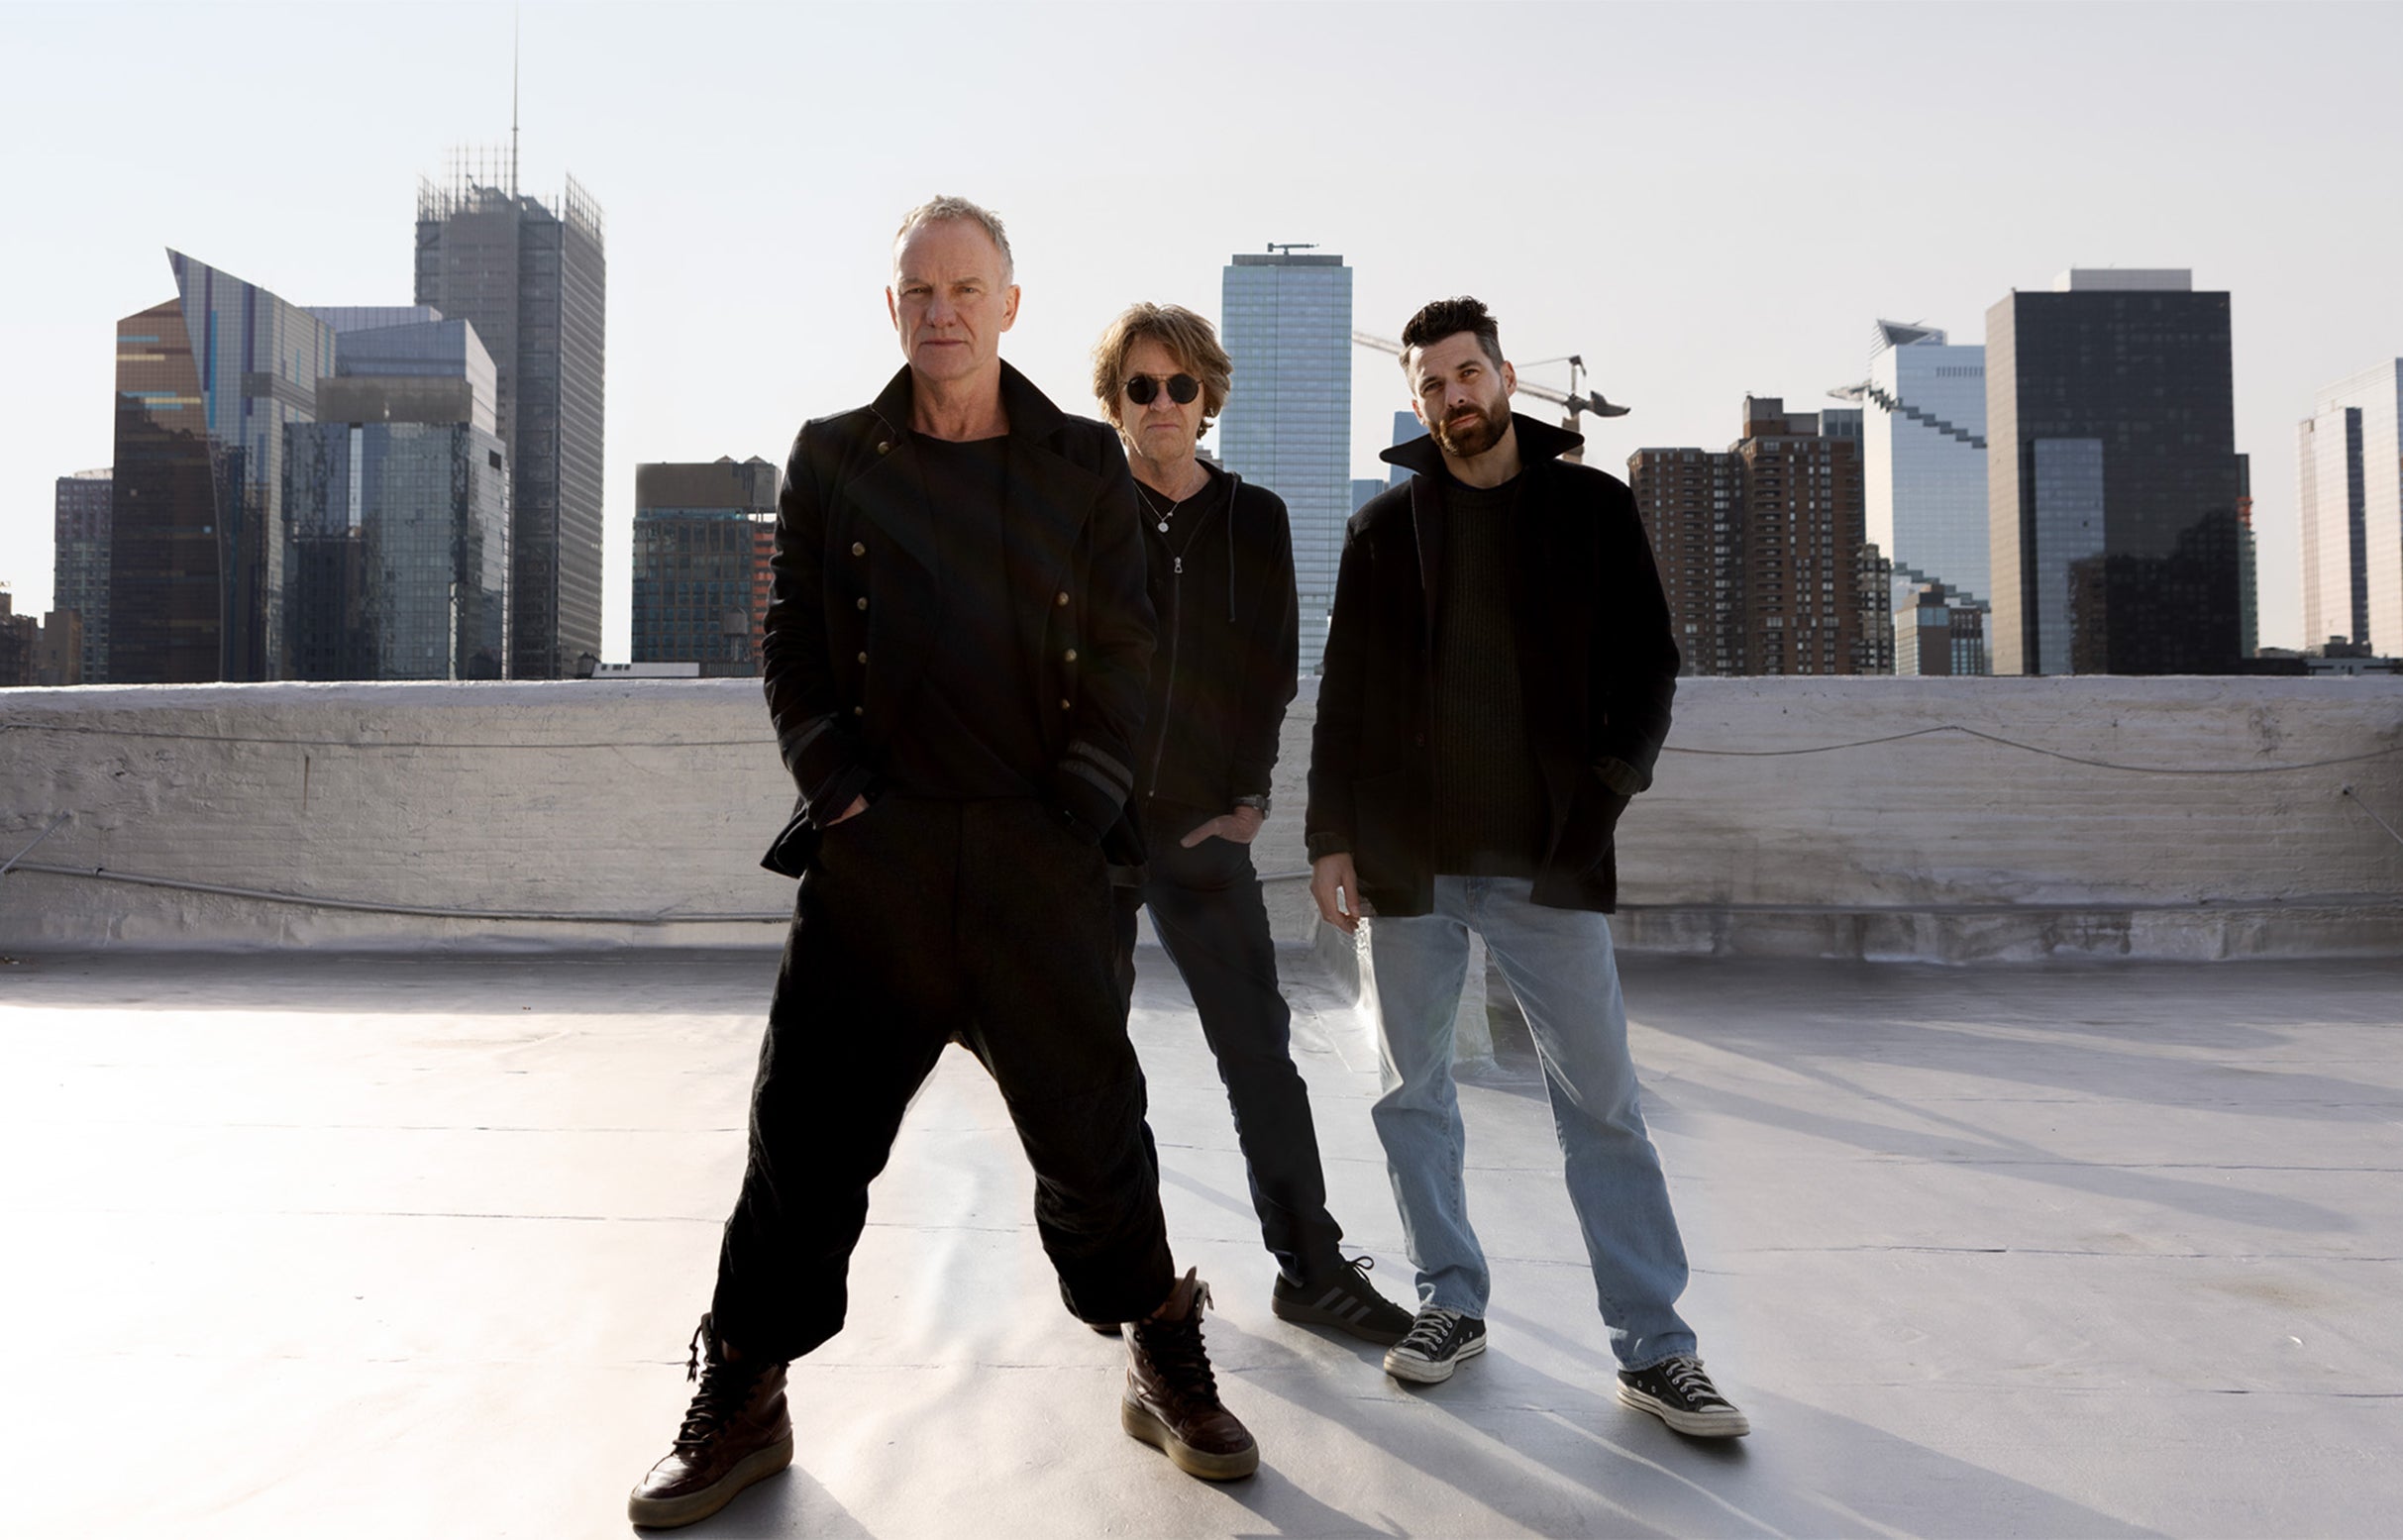 working presale code for STING 3.0 Tour presale tickets in Miami Beach